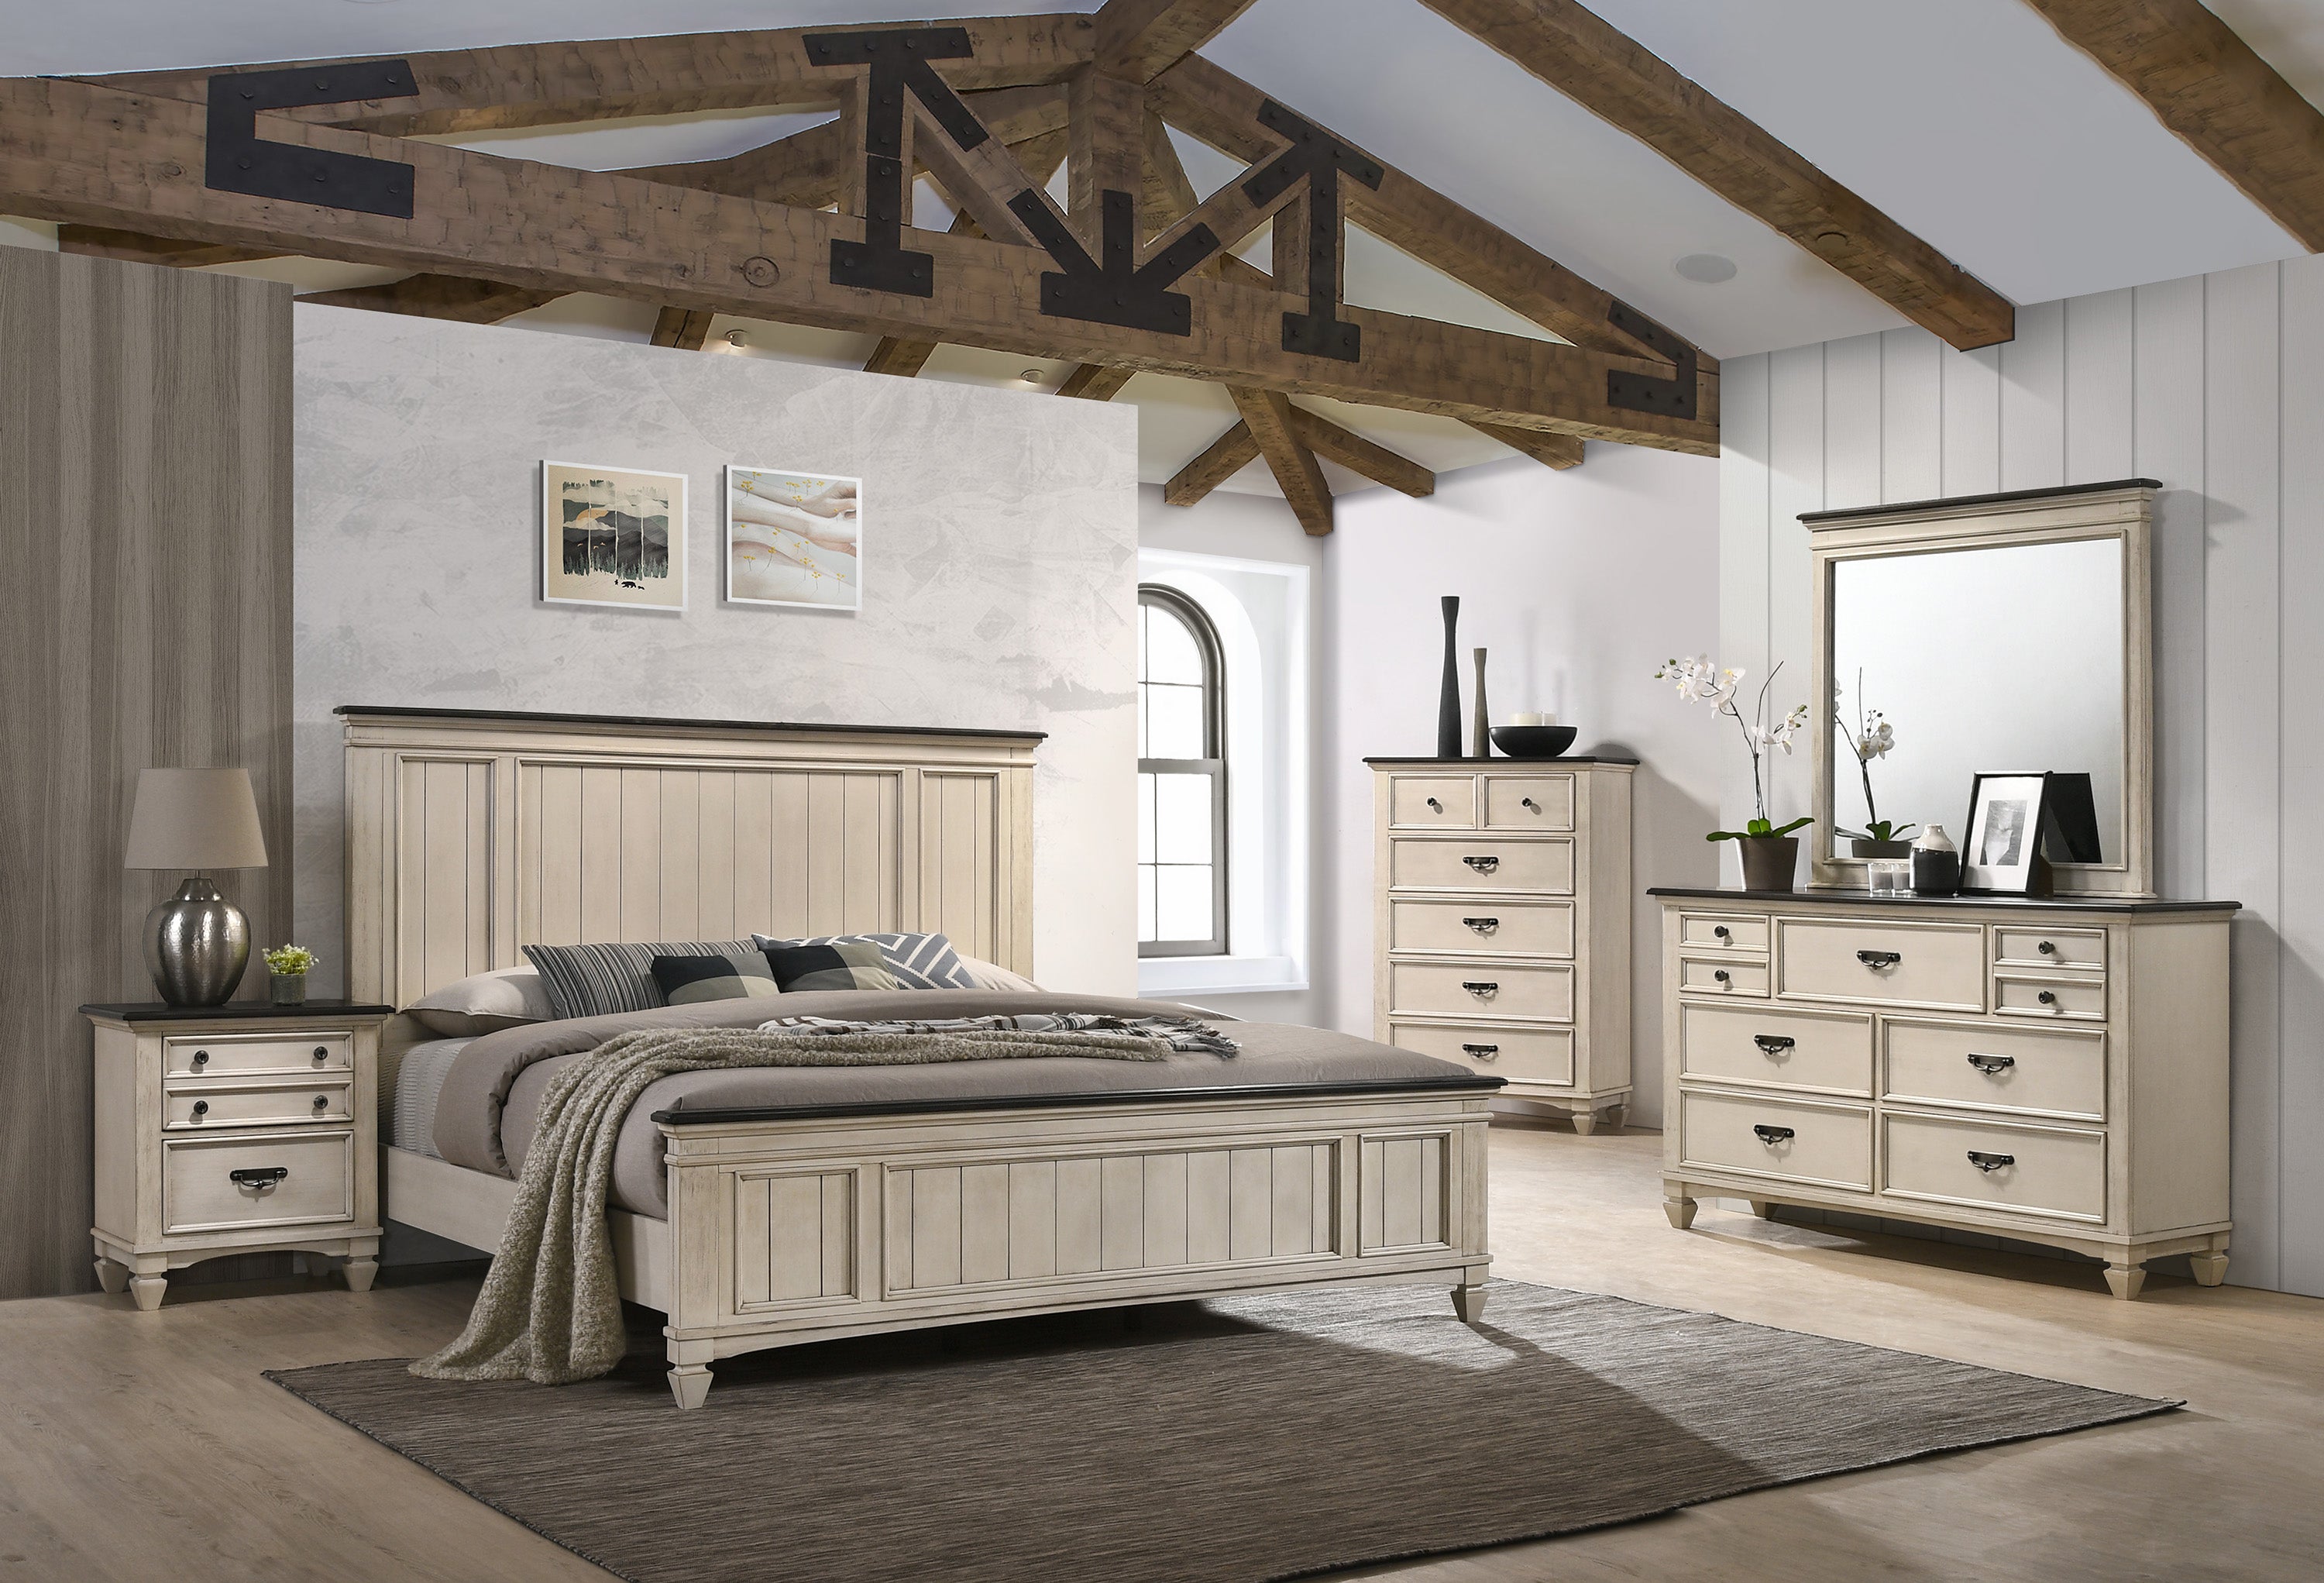 modern farm house bedroom by liberty furniture